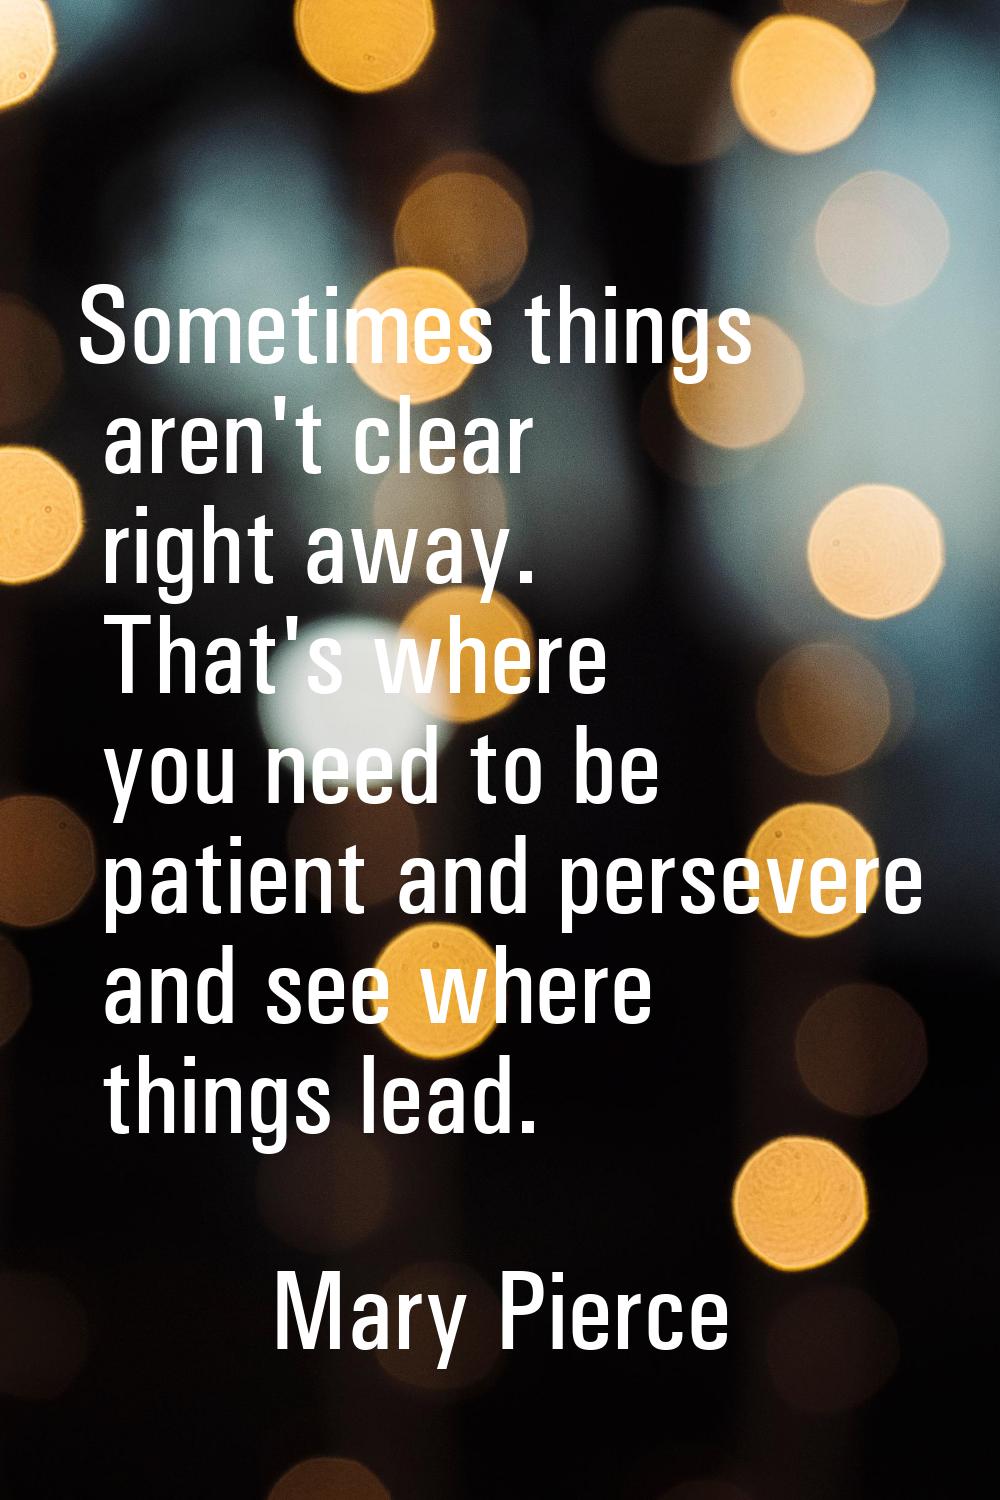 Sometimes things aren't clear right away. That's where you need to be patient and persevere and see